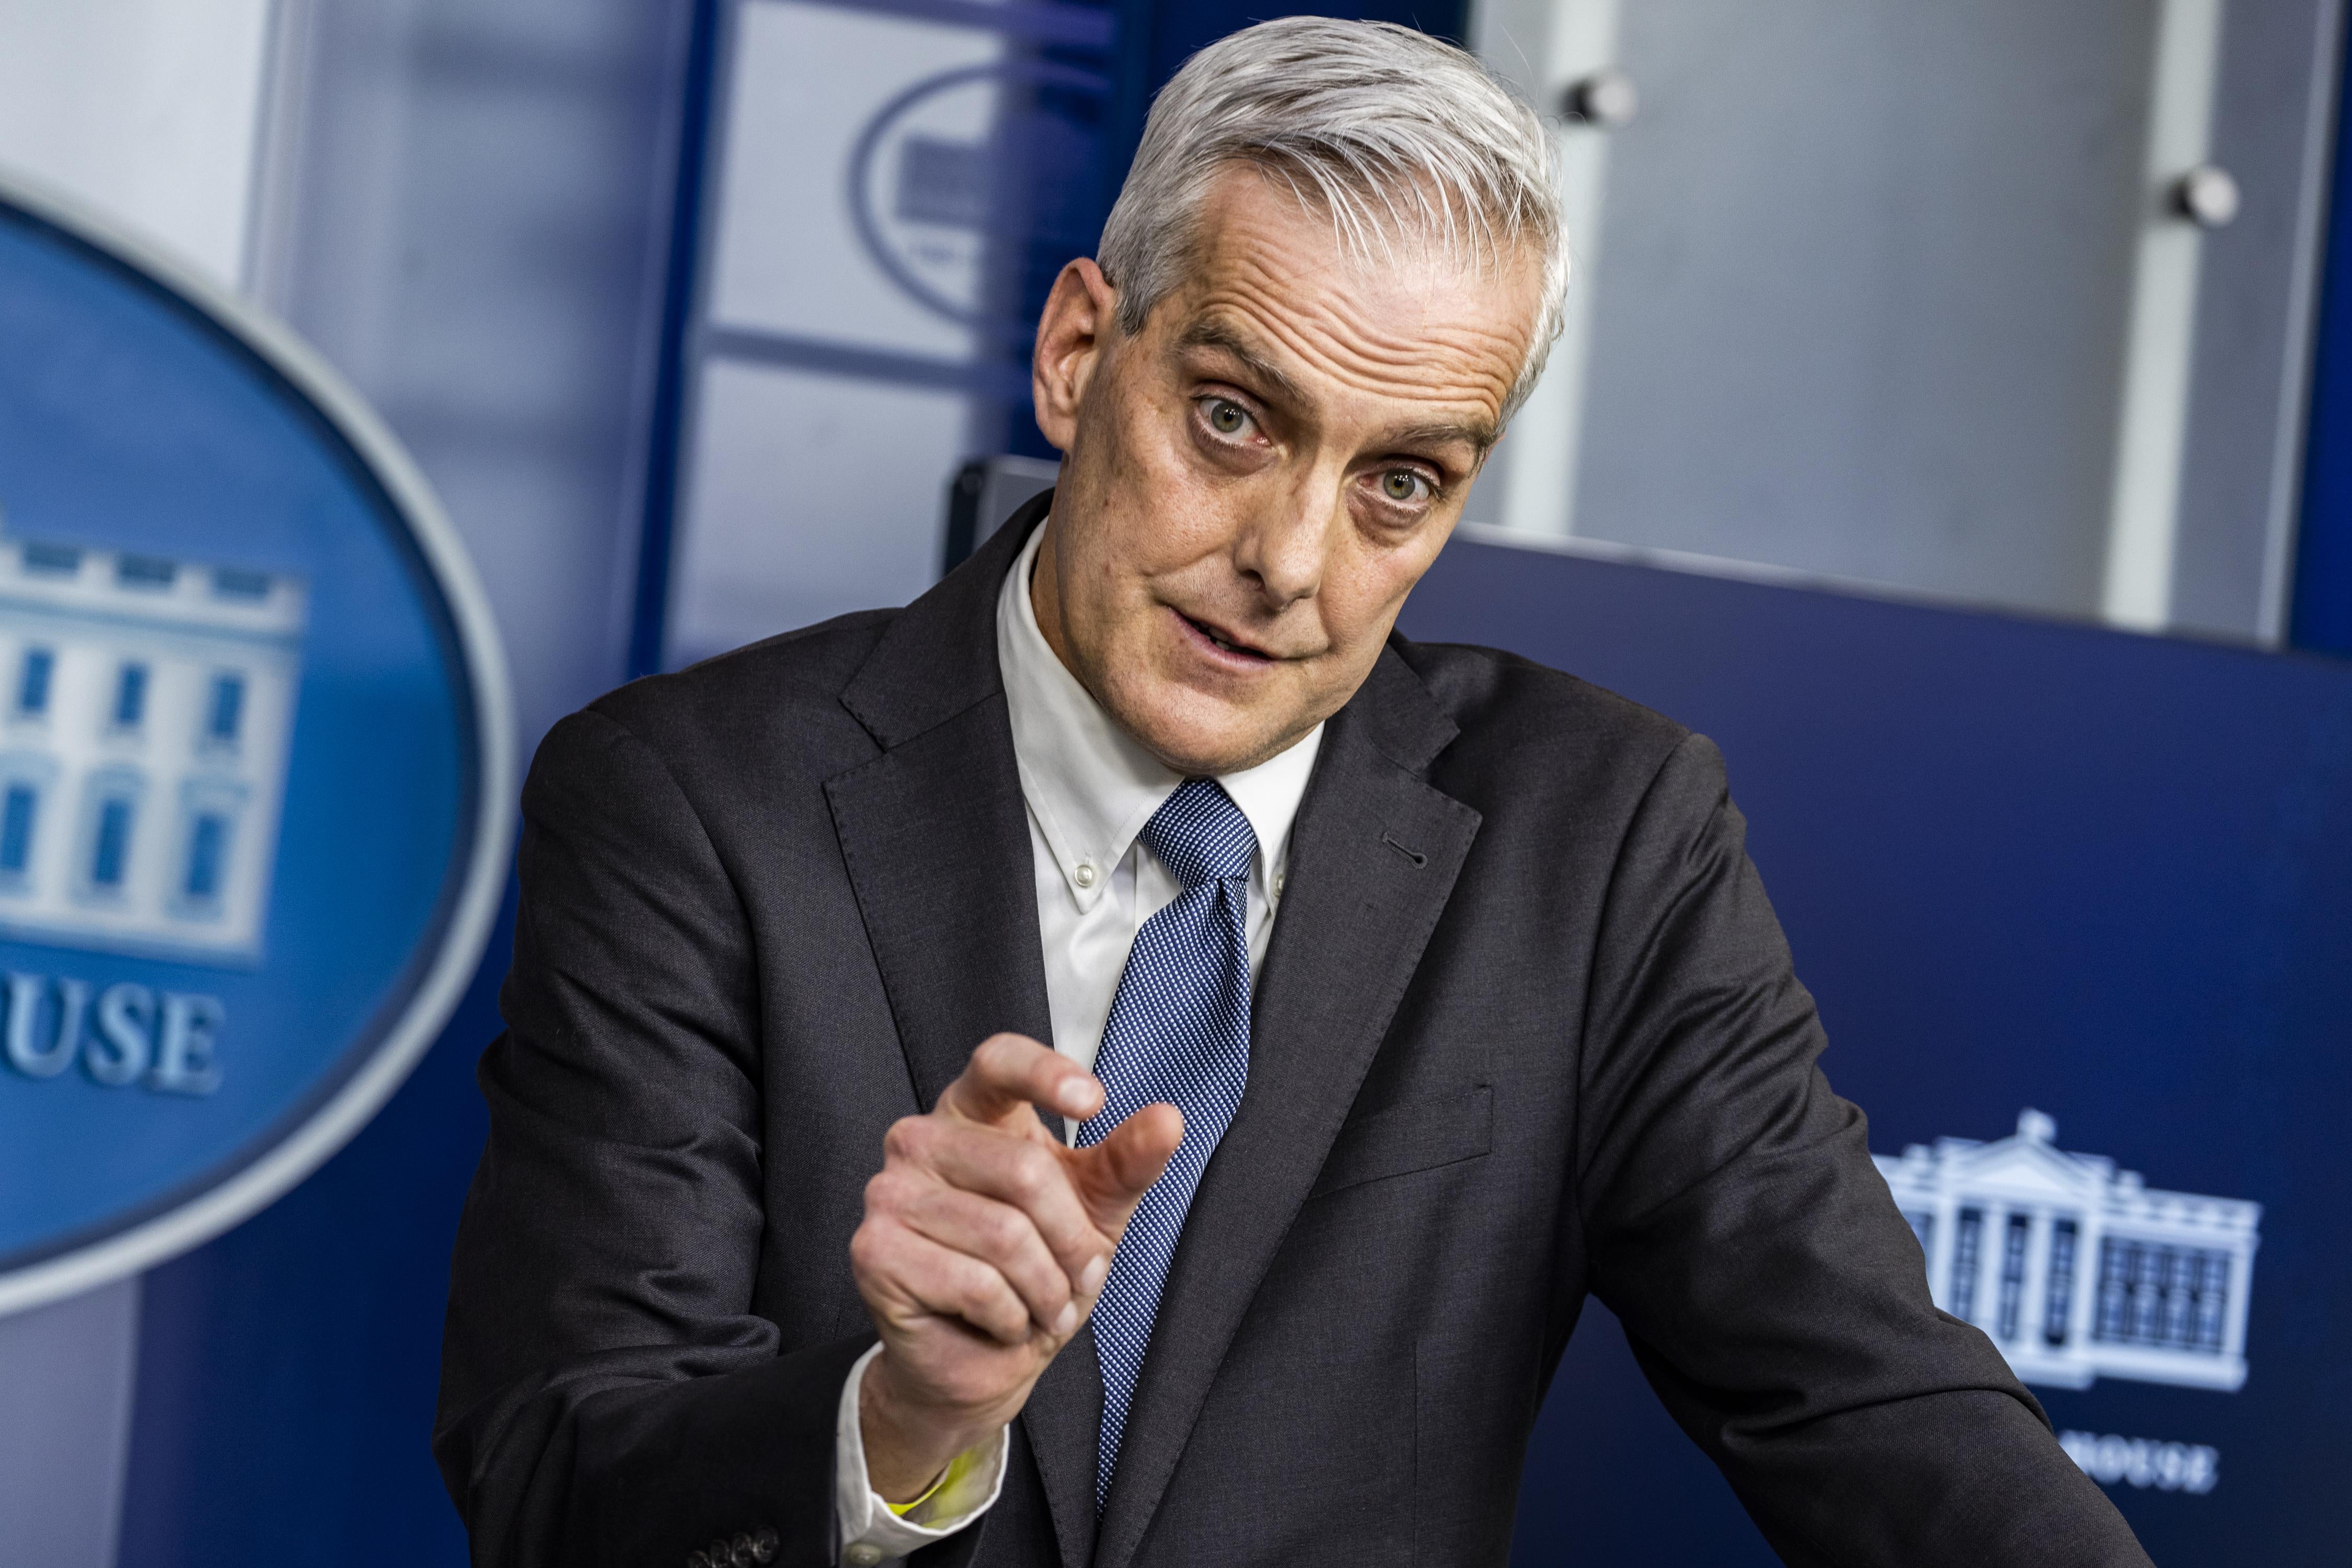 Secretary of Veterans Affairs Denis McDonough speaks during the daily press briefing in the Brady Press Briefing Room at the White House on March 4, 2021 in Washington, D.C.